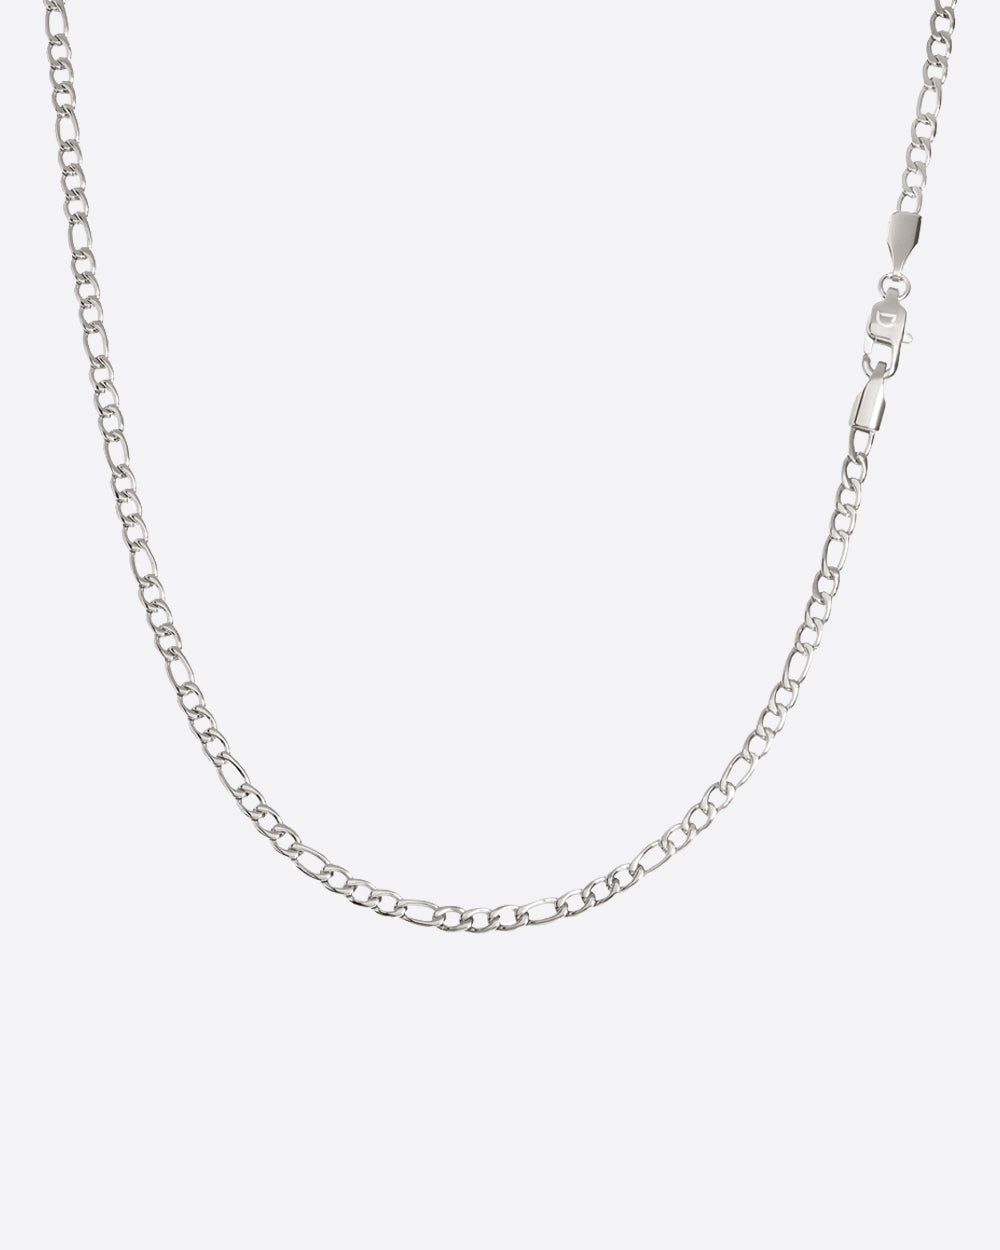 CLEAN FIGARO CHAIN. - 3MM WHITE GOLD